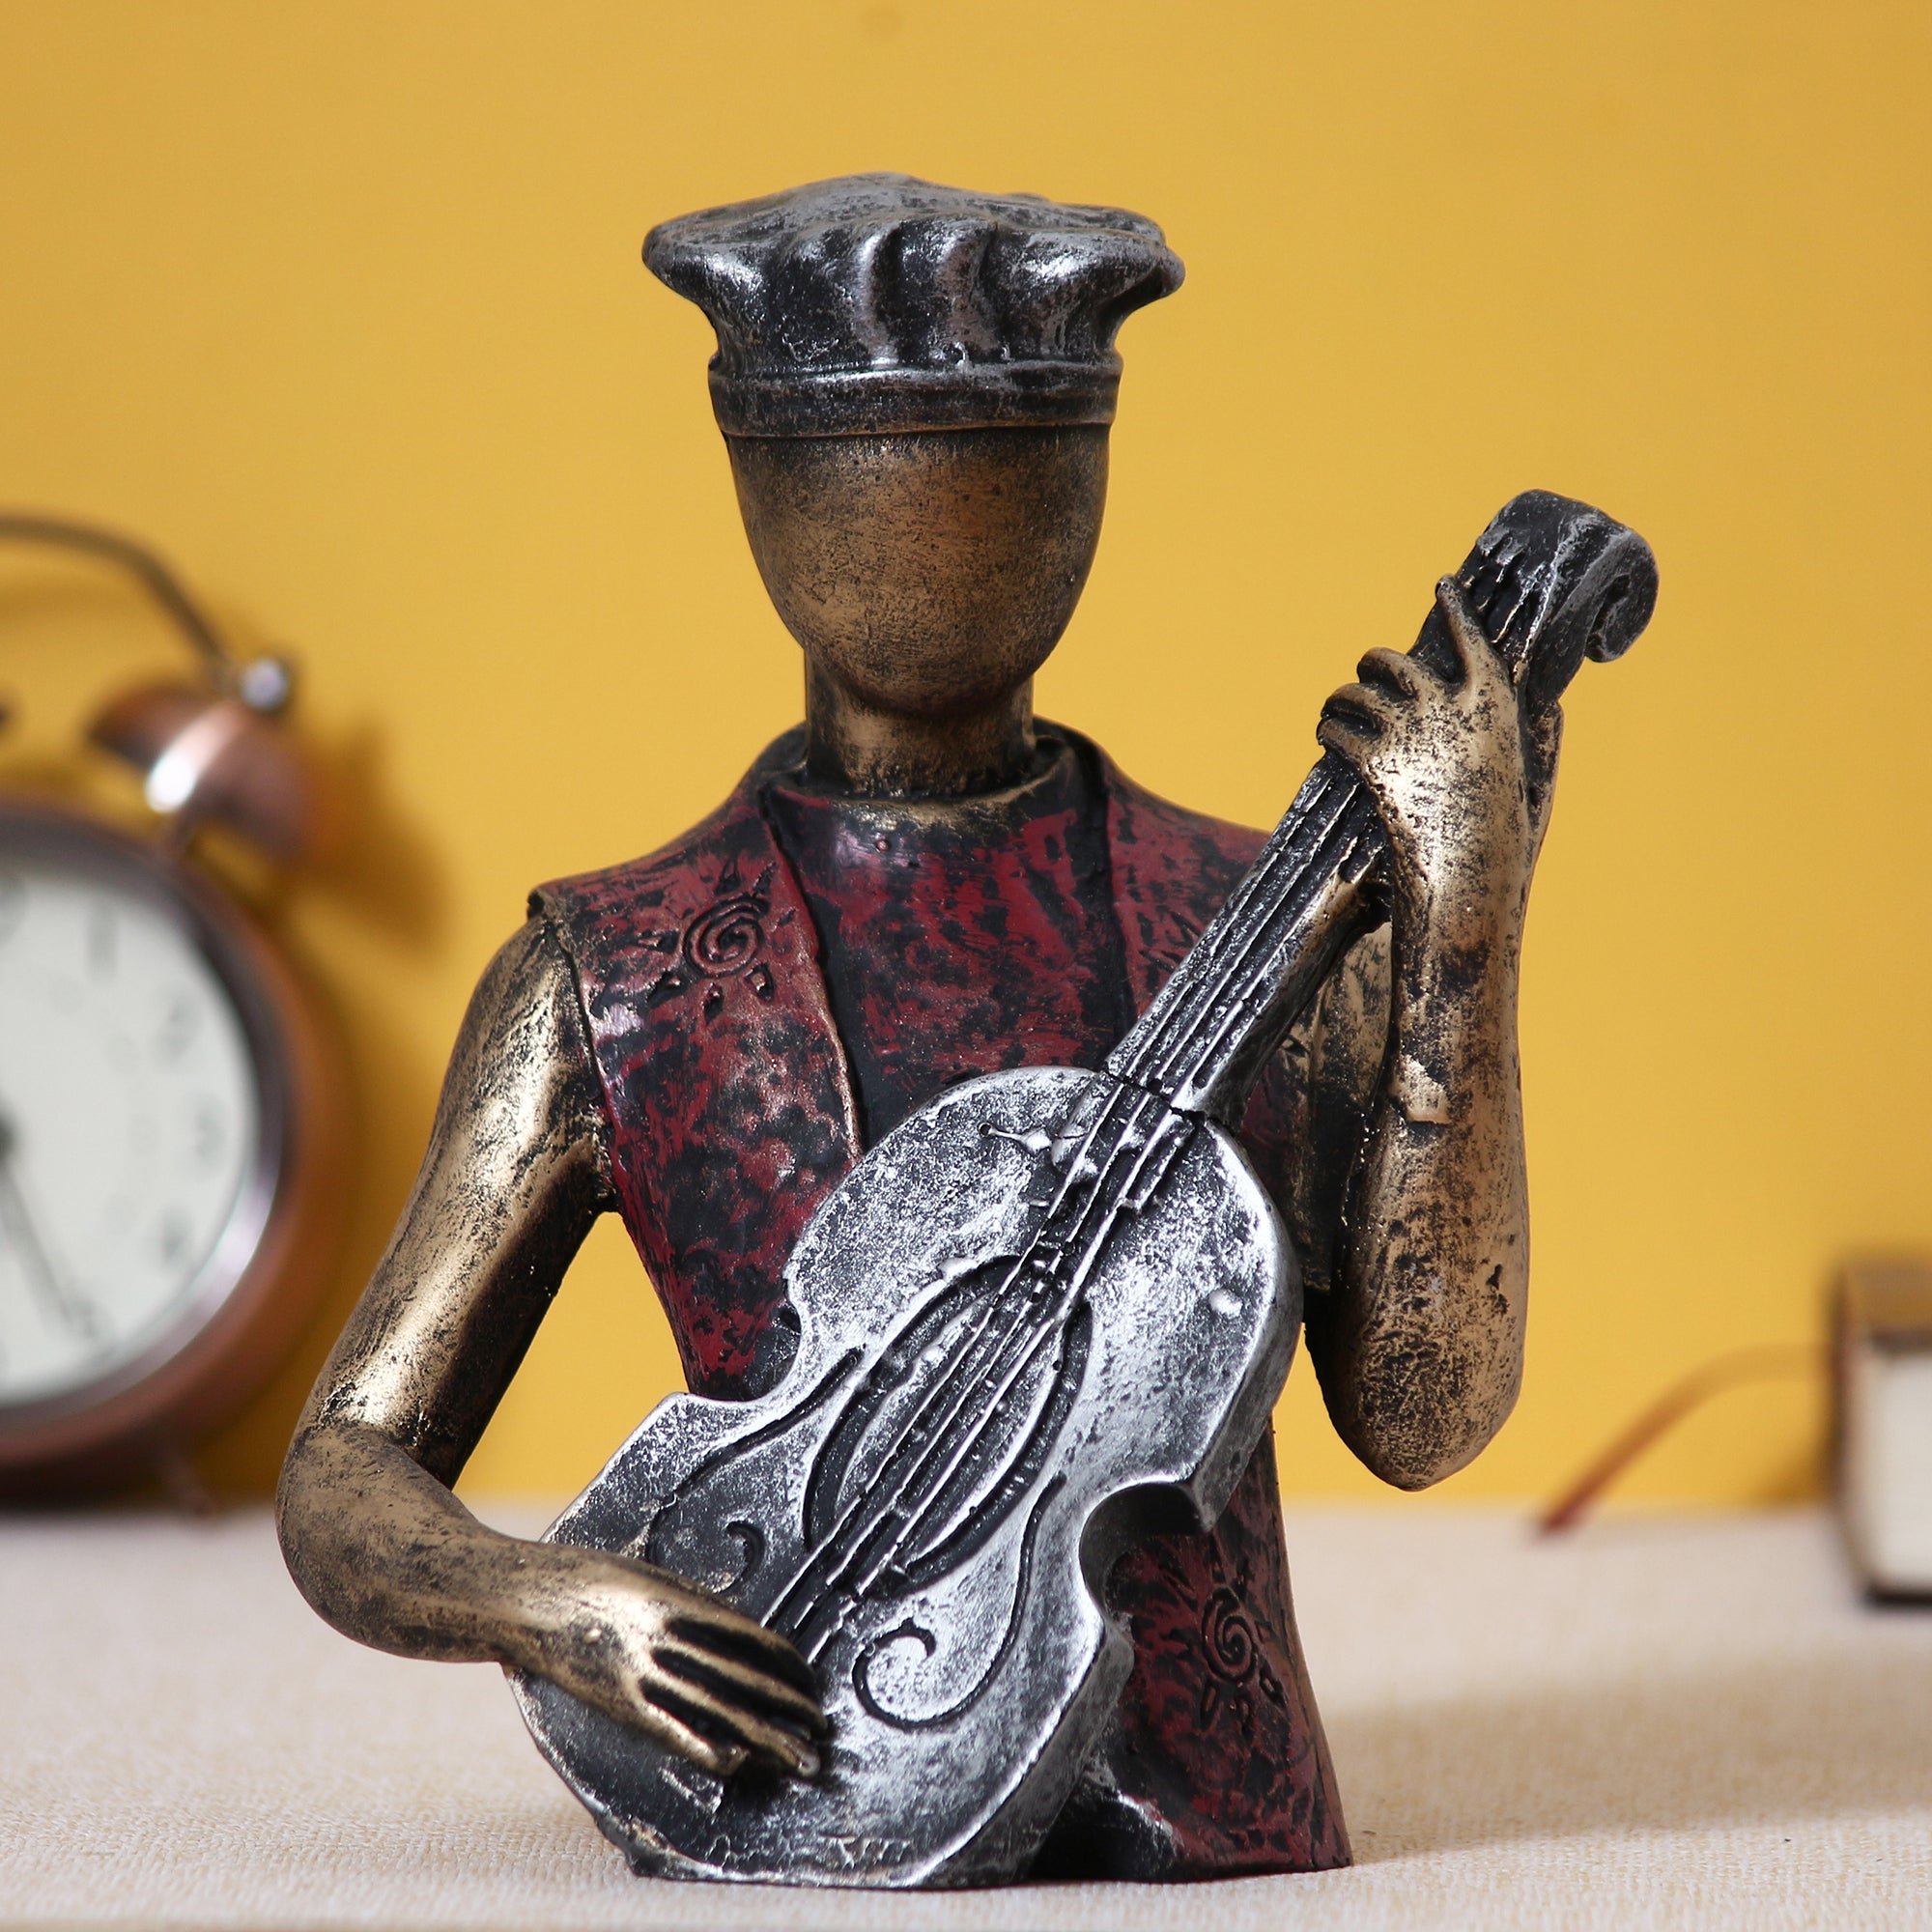 Man Figurine with Hat playing Guitar Musical Instrument (Brown, Silver and Golden) 6